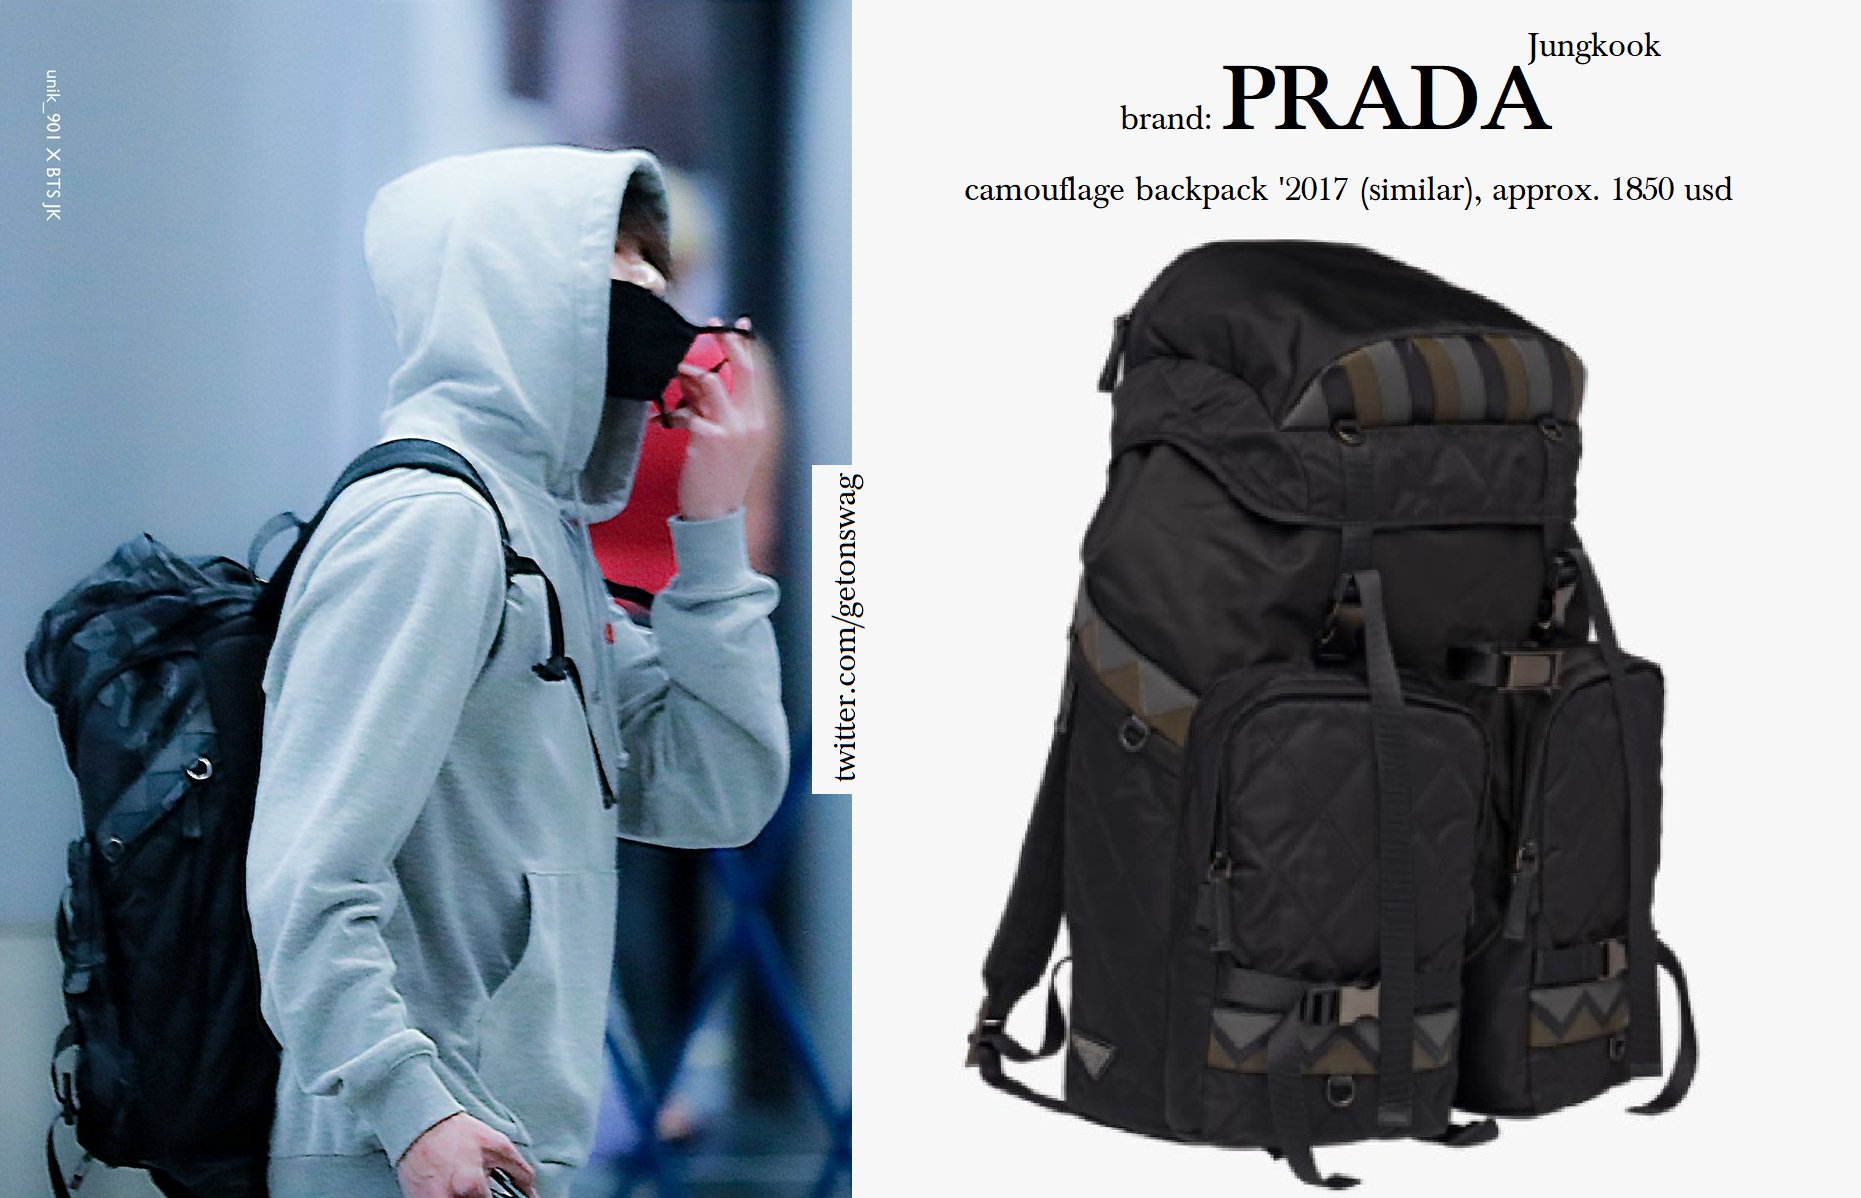 Beyond The Style ✼ Alex ✼ di X: 180523 airport [ JUNGKOOK #BTS #JUNGKOOK  #정국 #방탄소년단 ] PRADA camouflage backpack '2017 (similar), approx. 1850 usd 🎁   / X